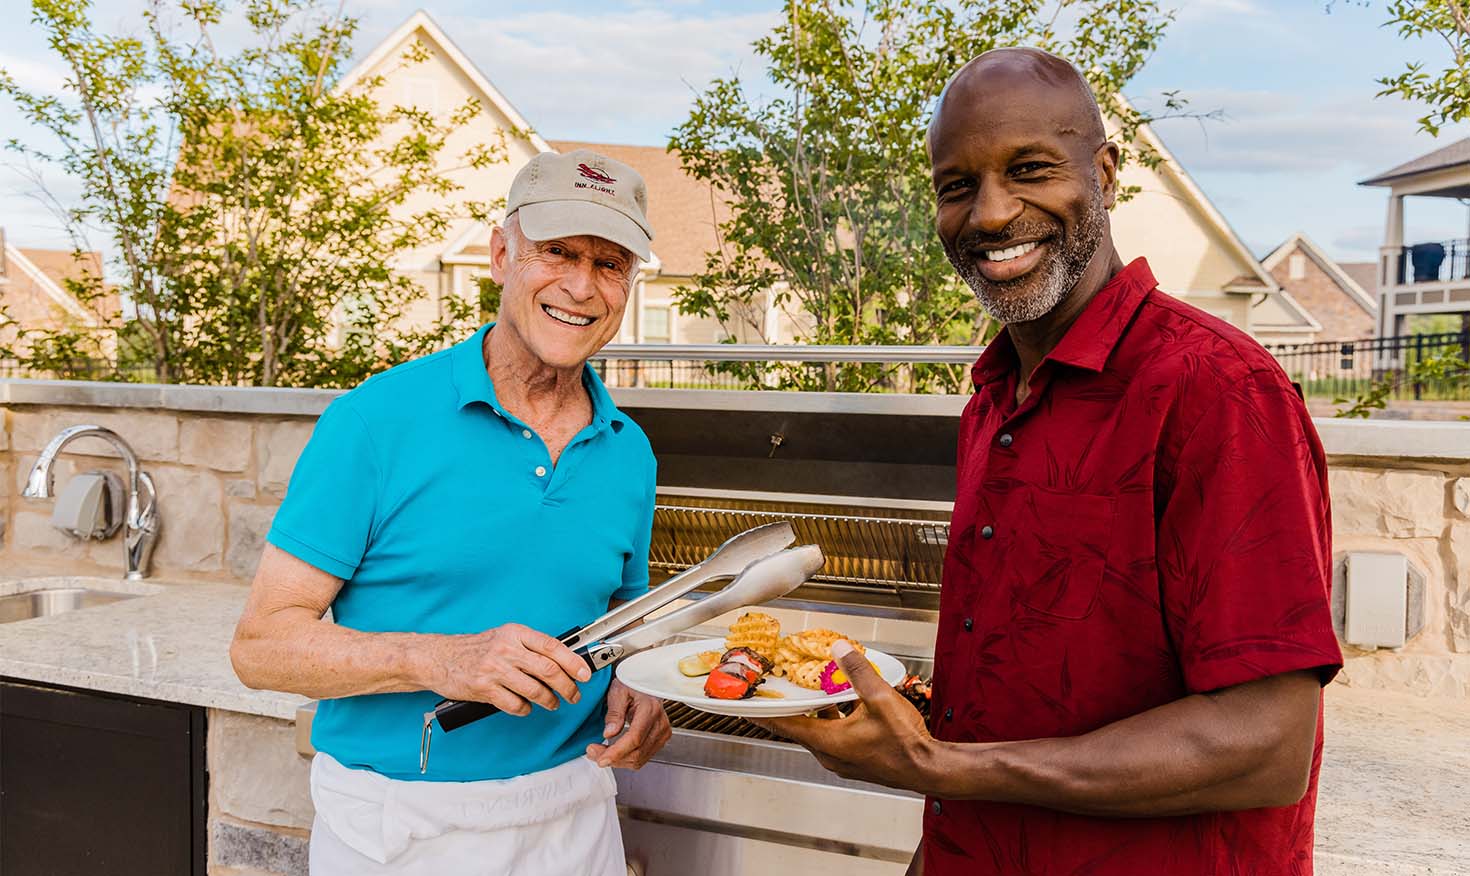 Two senior men grilling on a barbecue